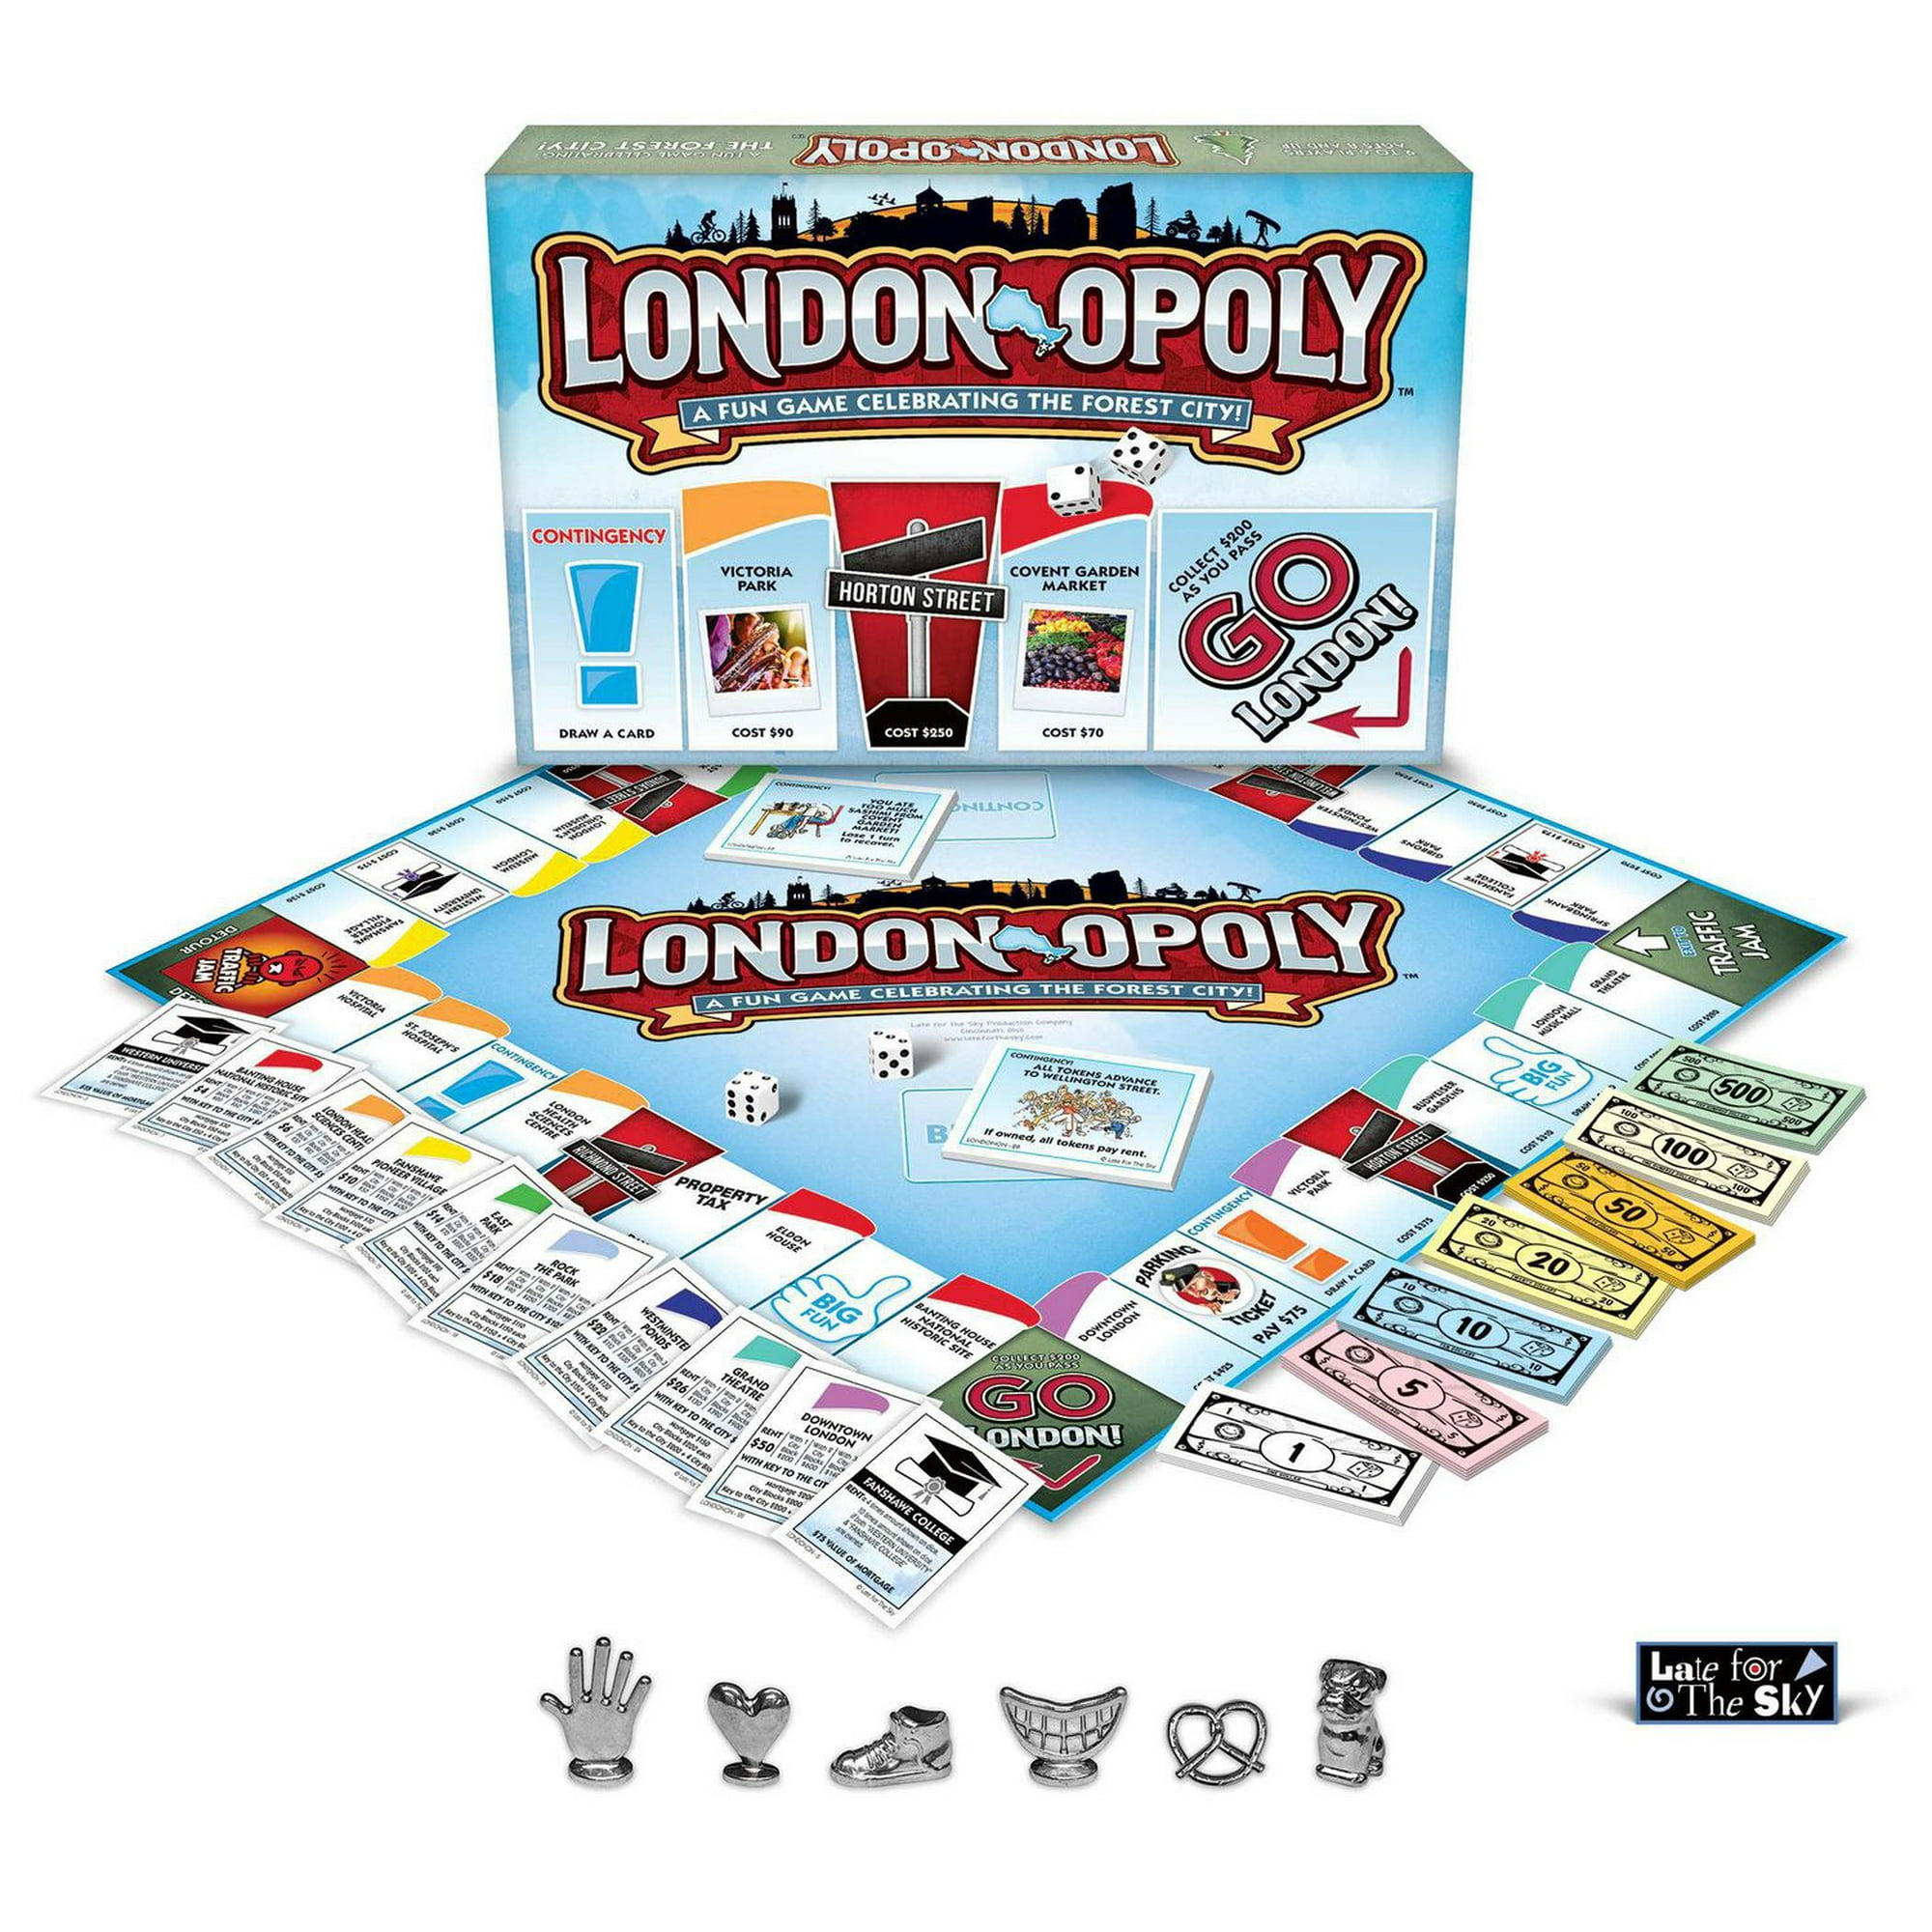 Buy Fishin'-Opoly Online With Canadian Pricing - Urban Nature Store